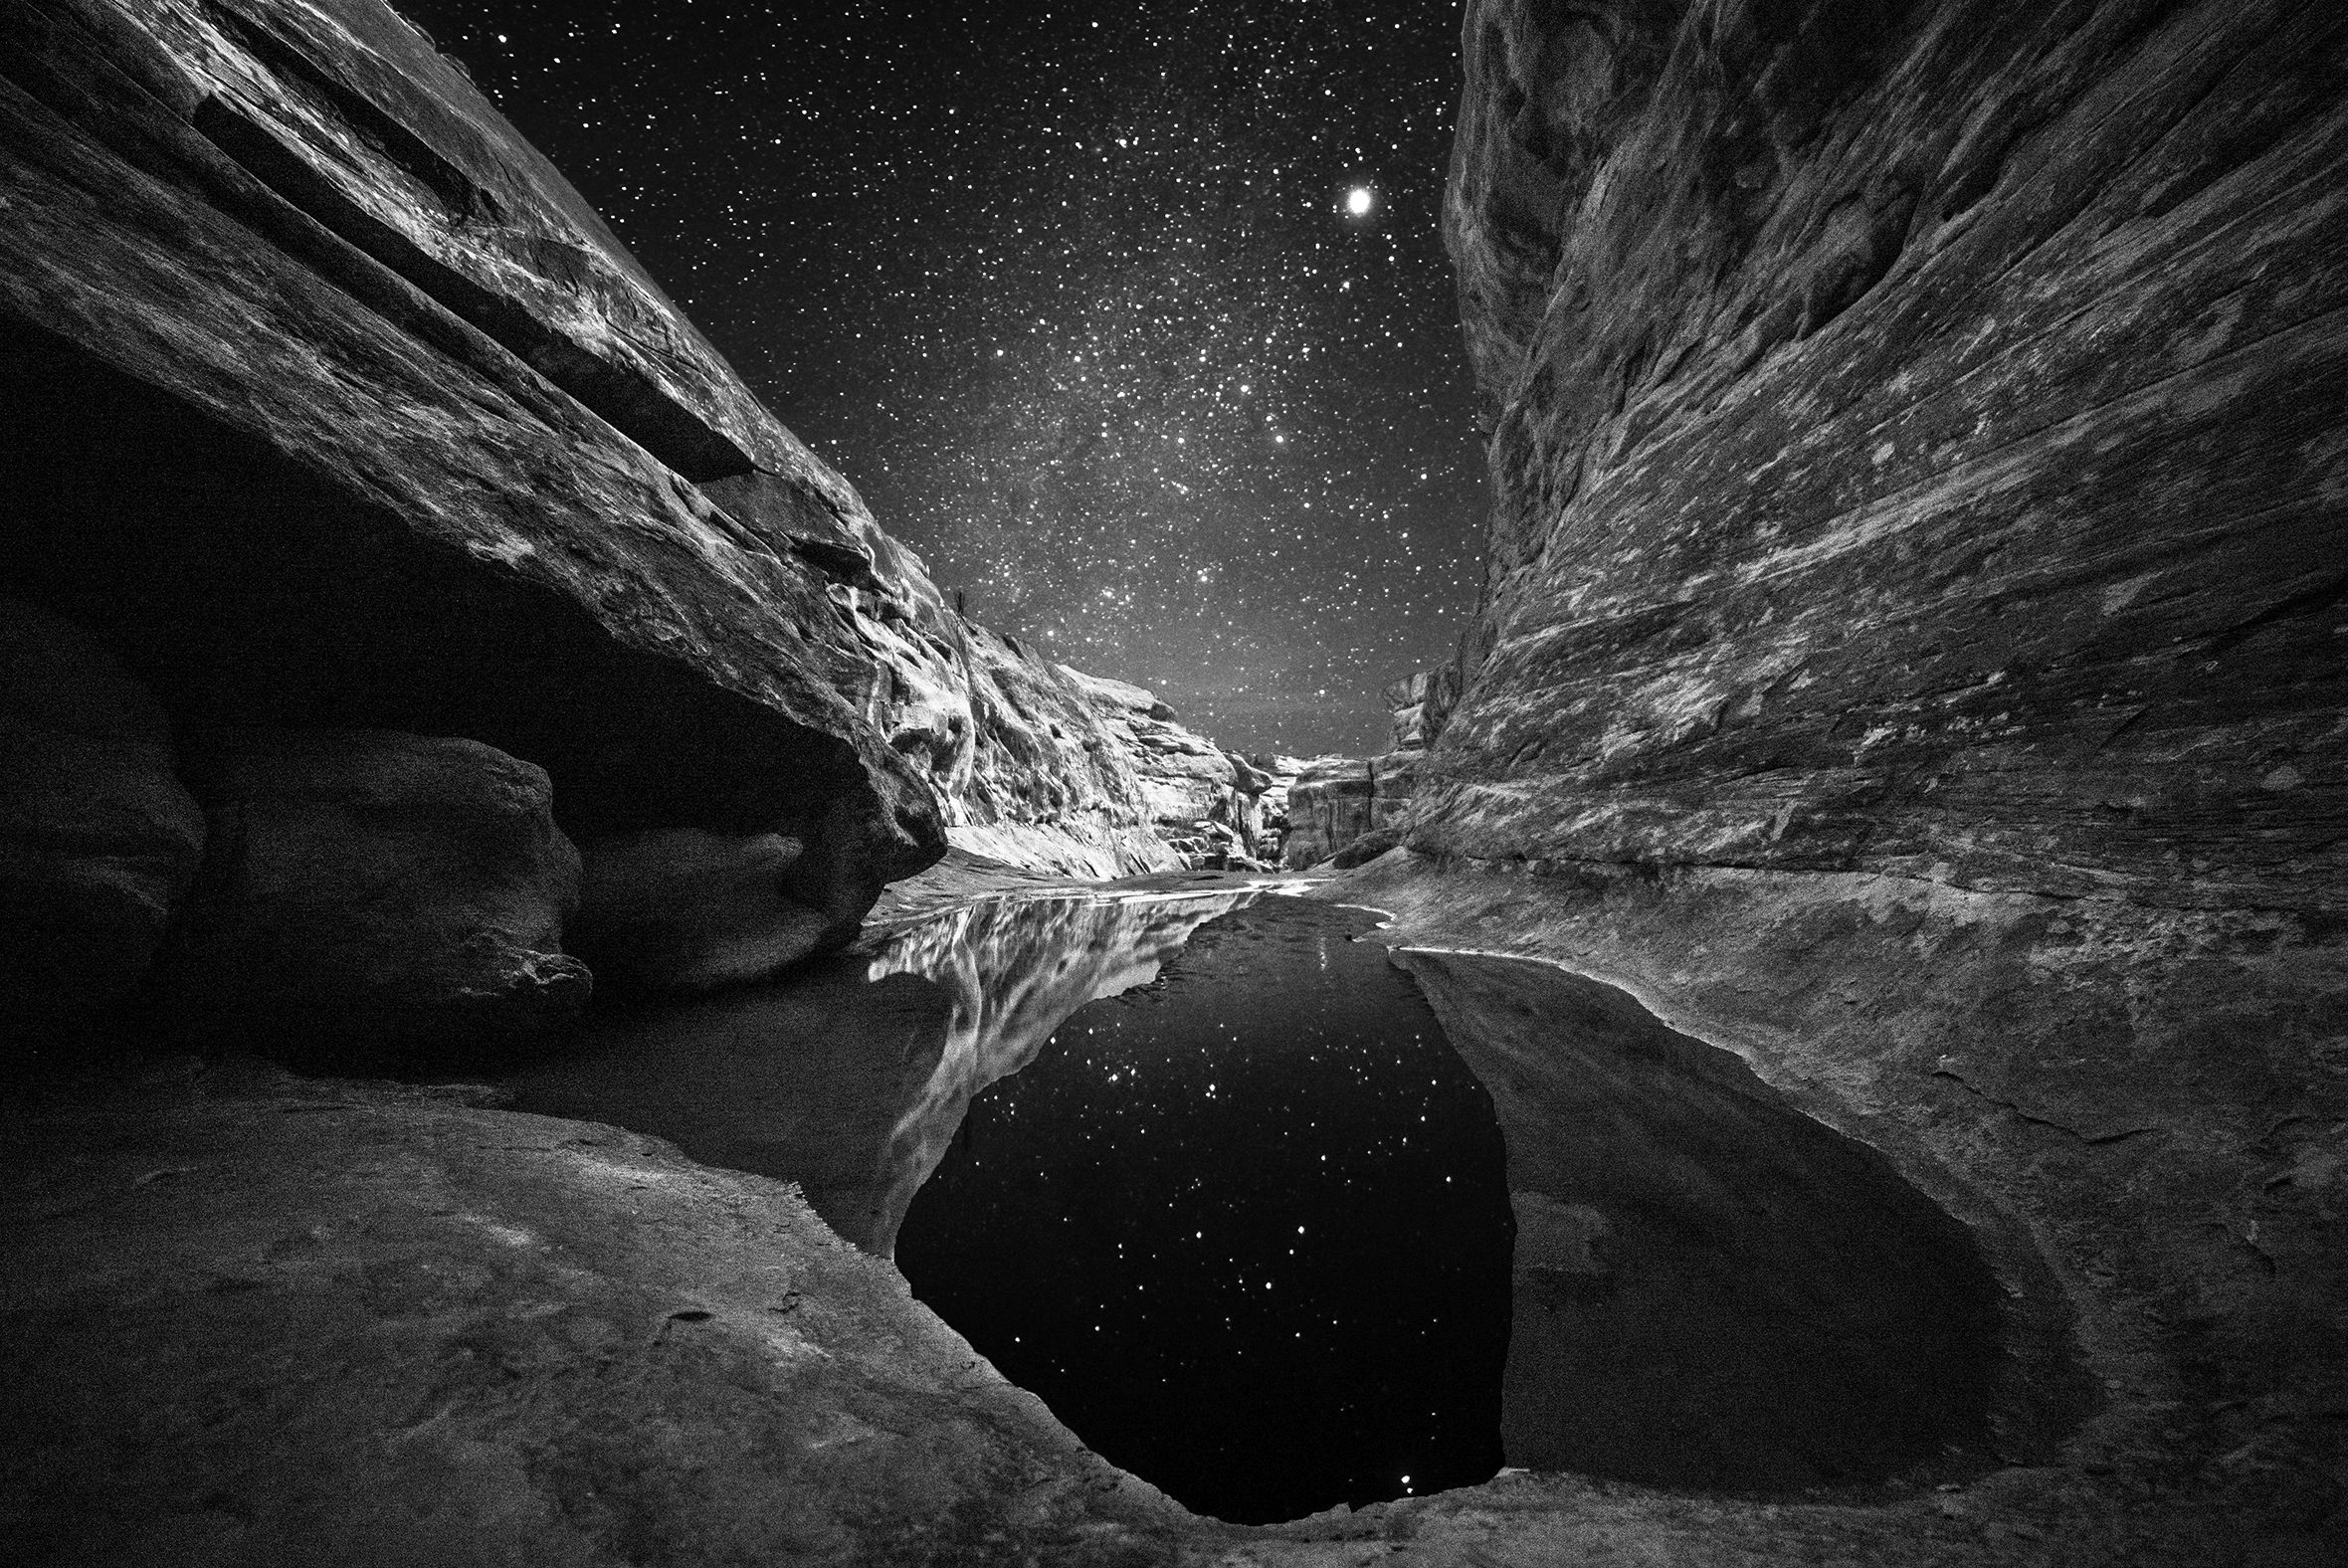 The photo titled “Nocturnal Images: Redman Pool” was taken of a pool at the bottom of a canyon with steep, close-in walls on a starry night. The reflections of the stars are visible in the water.